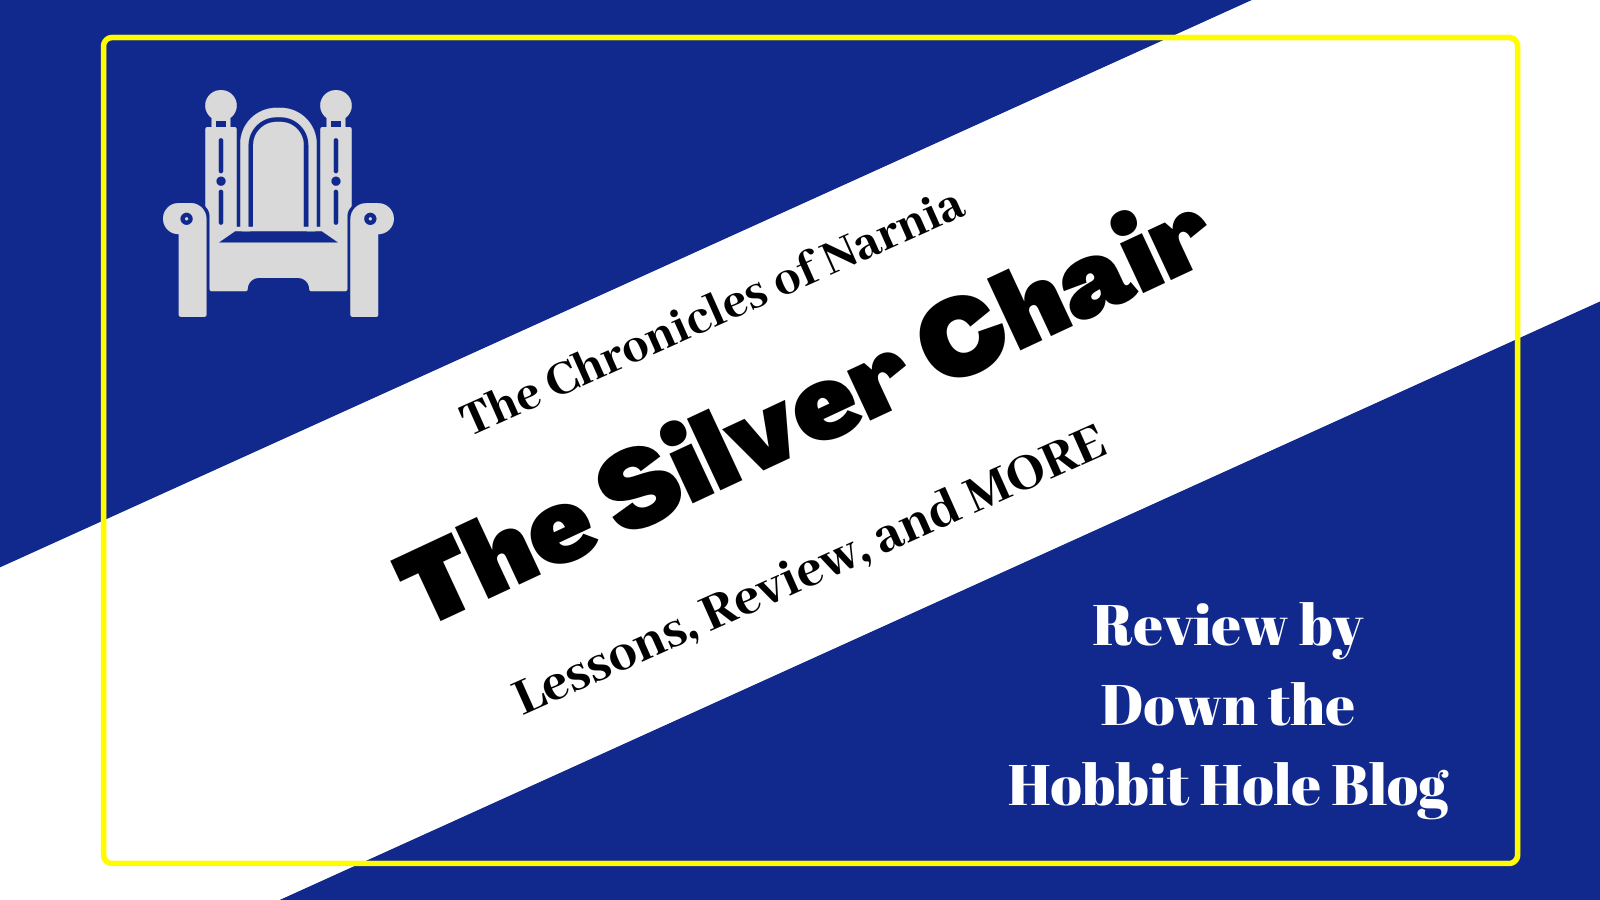 Silver Chair Curriculum and LEssons from the silver chair